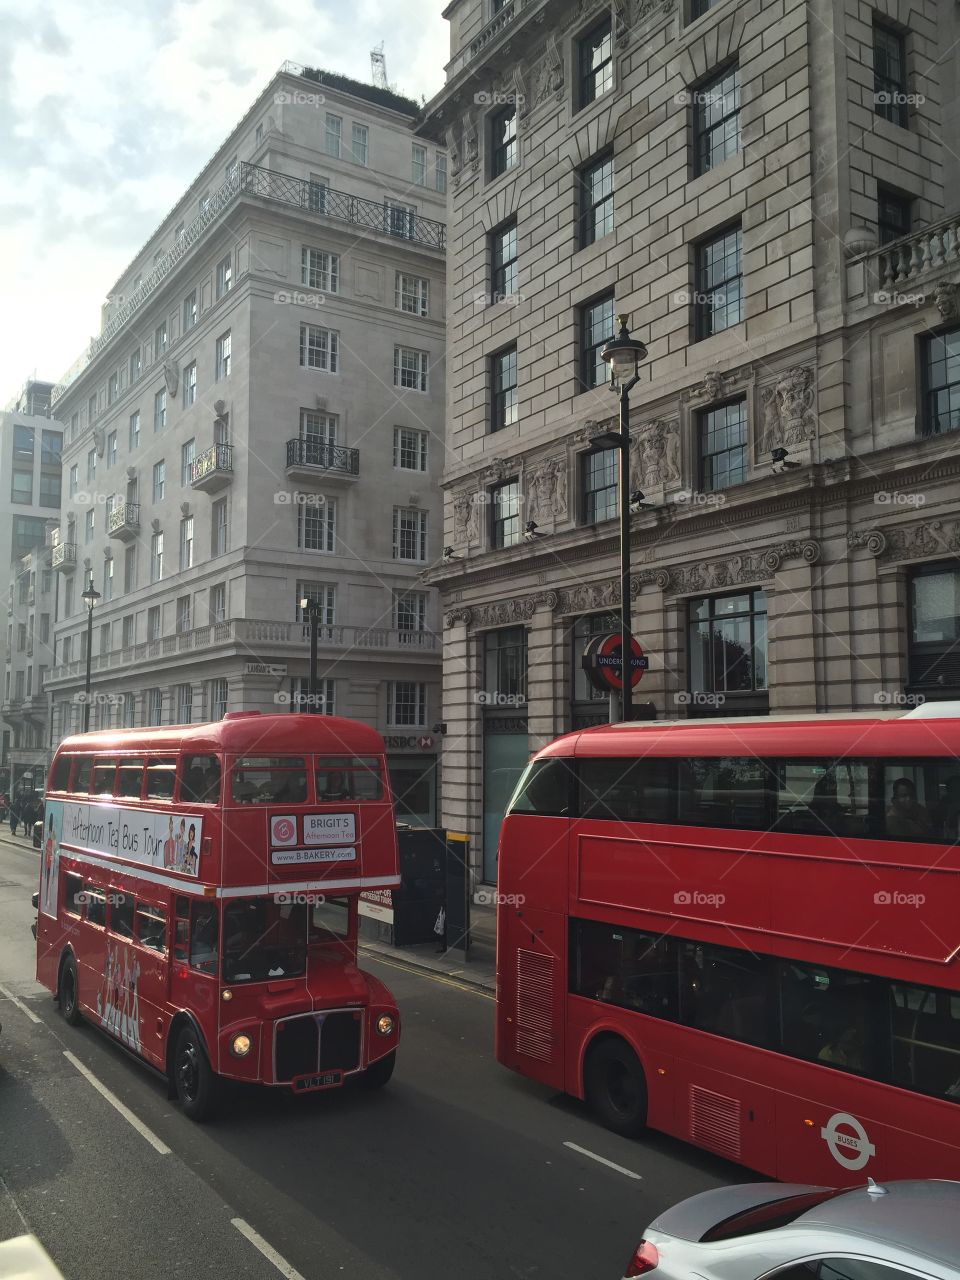 The hustle and bustle of London